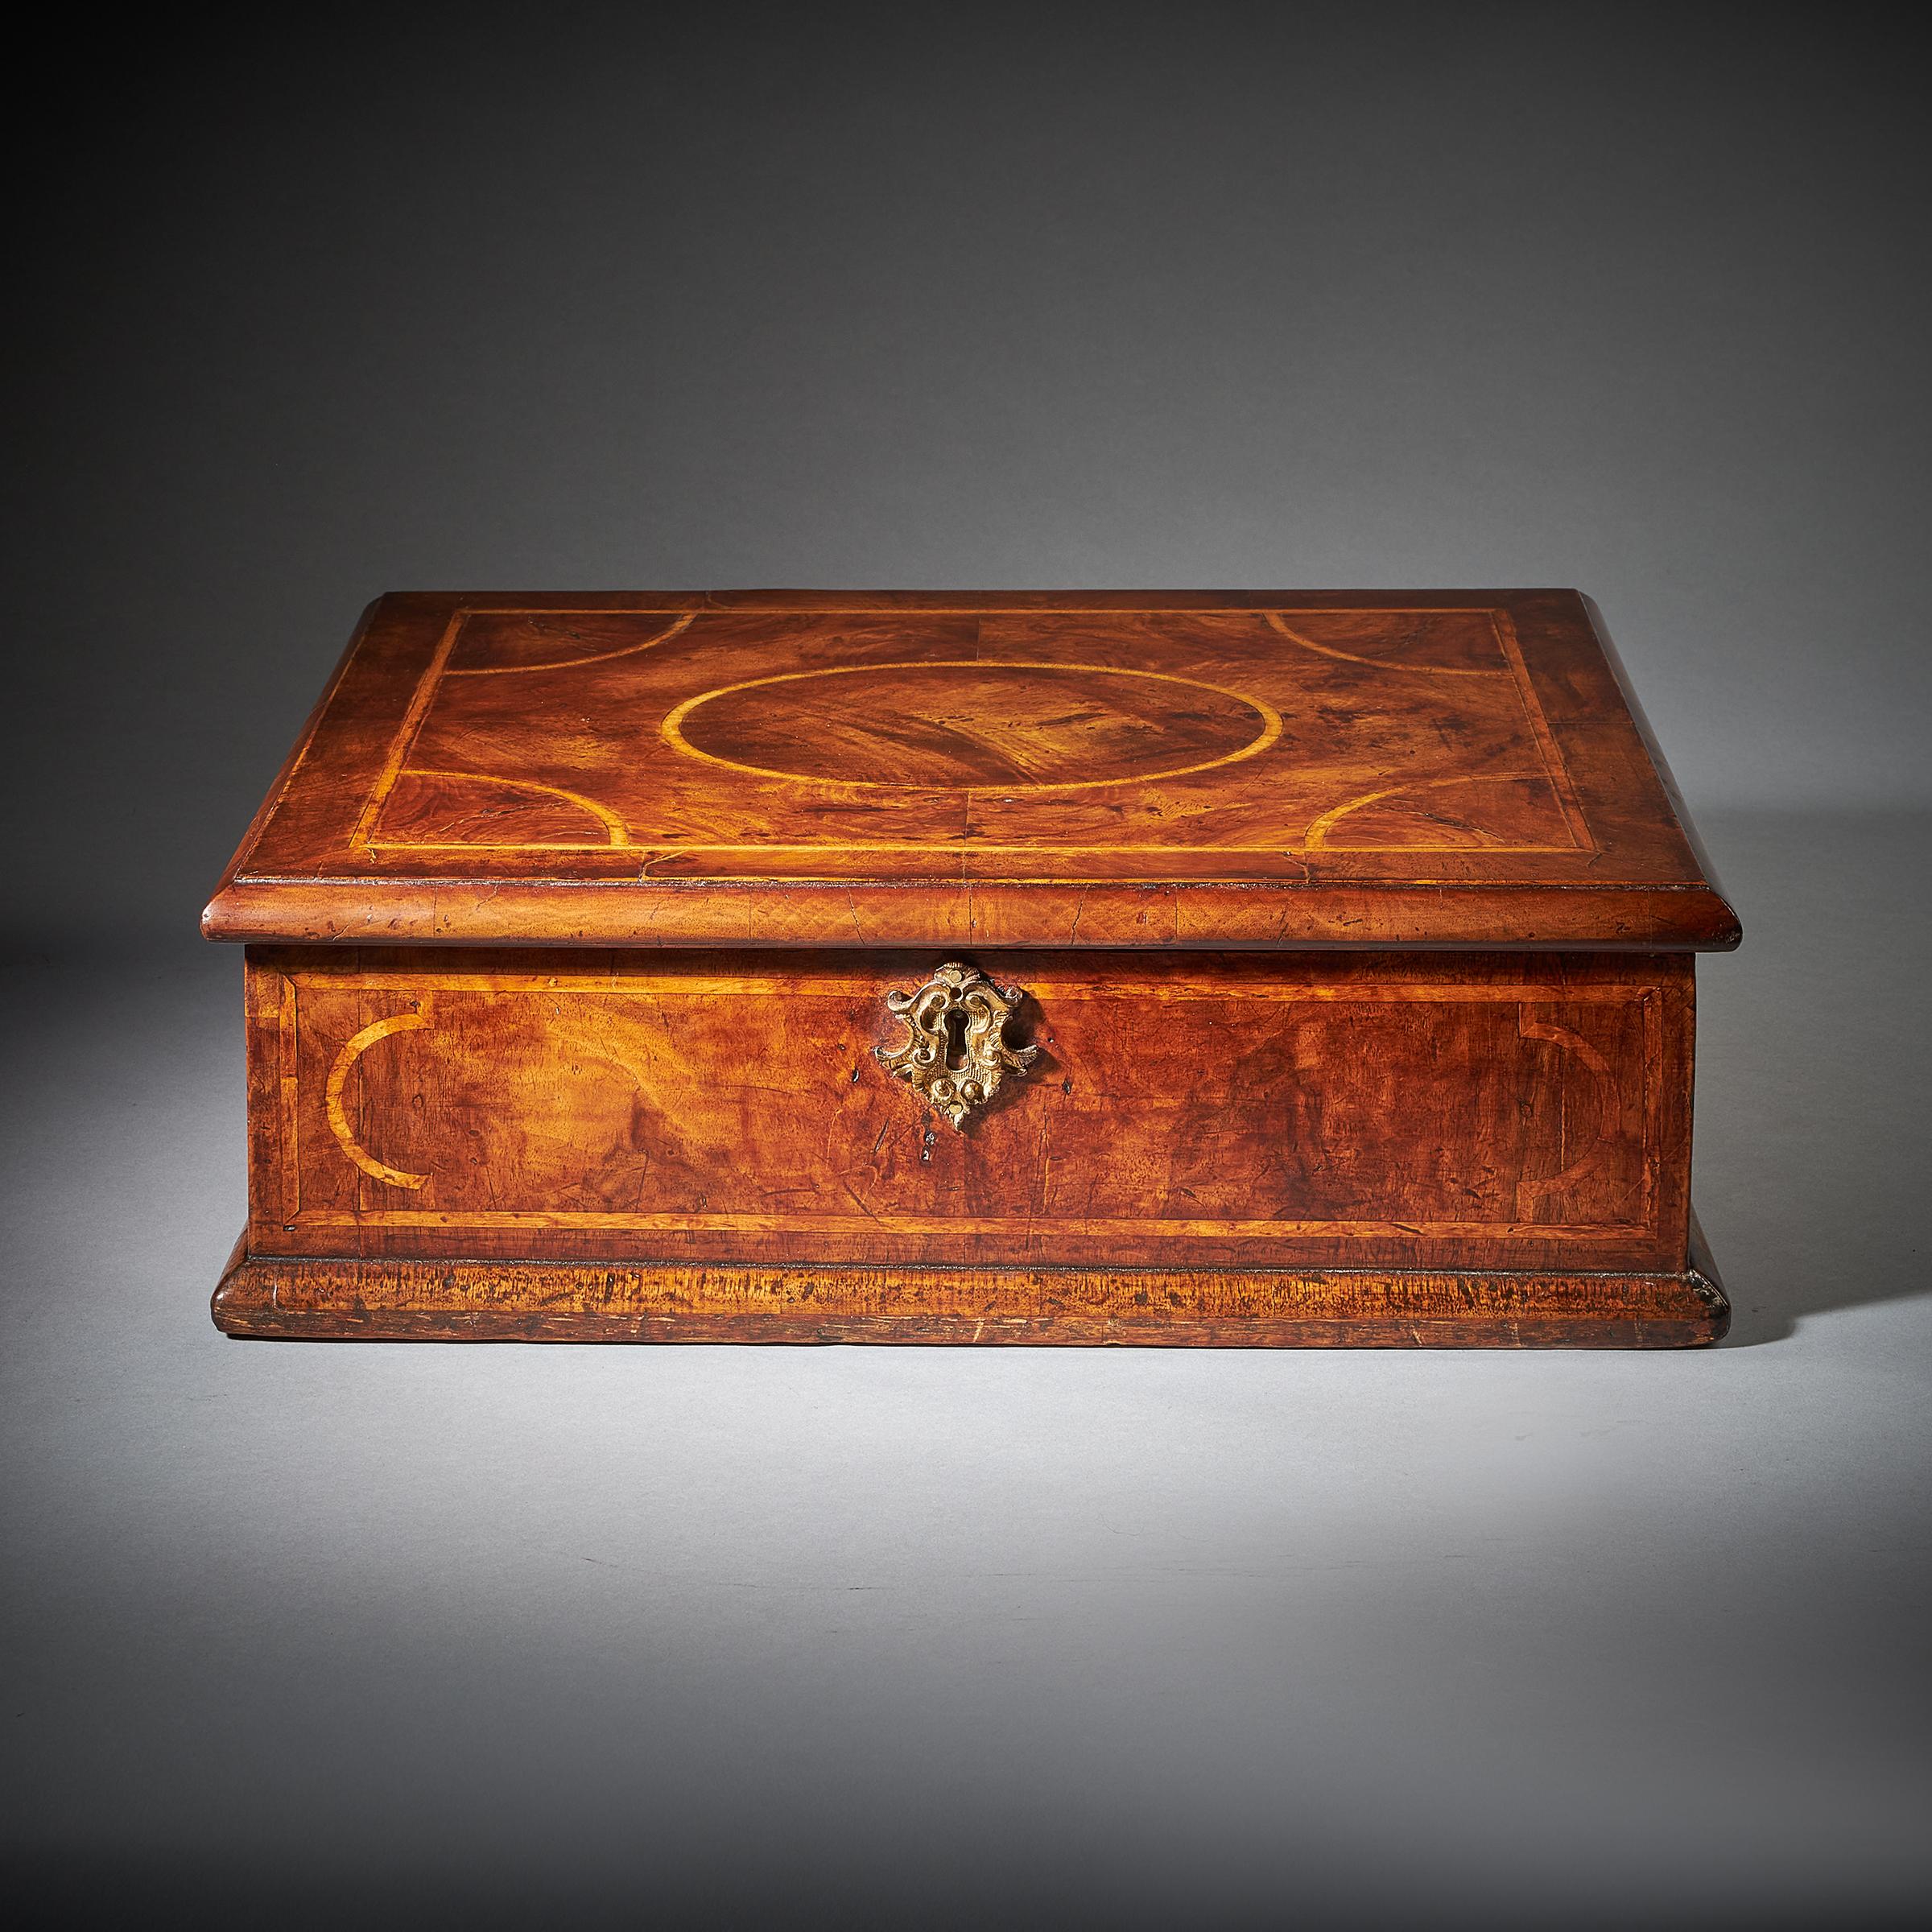 A rare figured walnut Queen Anne - George I period lace box, circa 1700-1720. 

The cross-grain banded ovolo moulded top is veneered in figured walnut consisting of an oval to the centre and a quadrant to each corner inlaid in holly. 

The